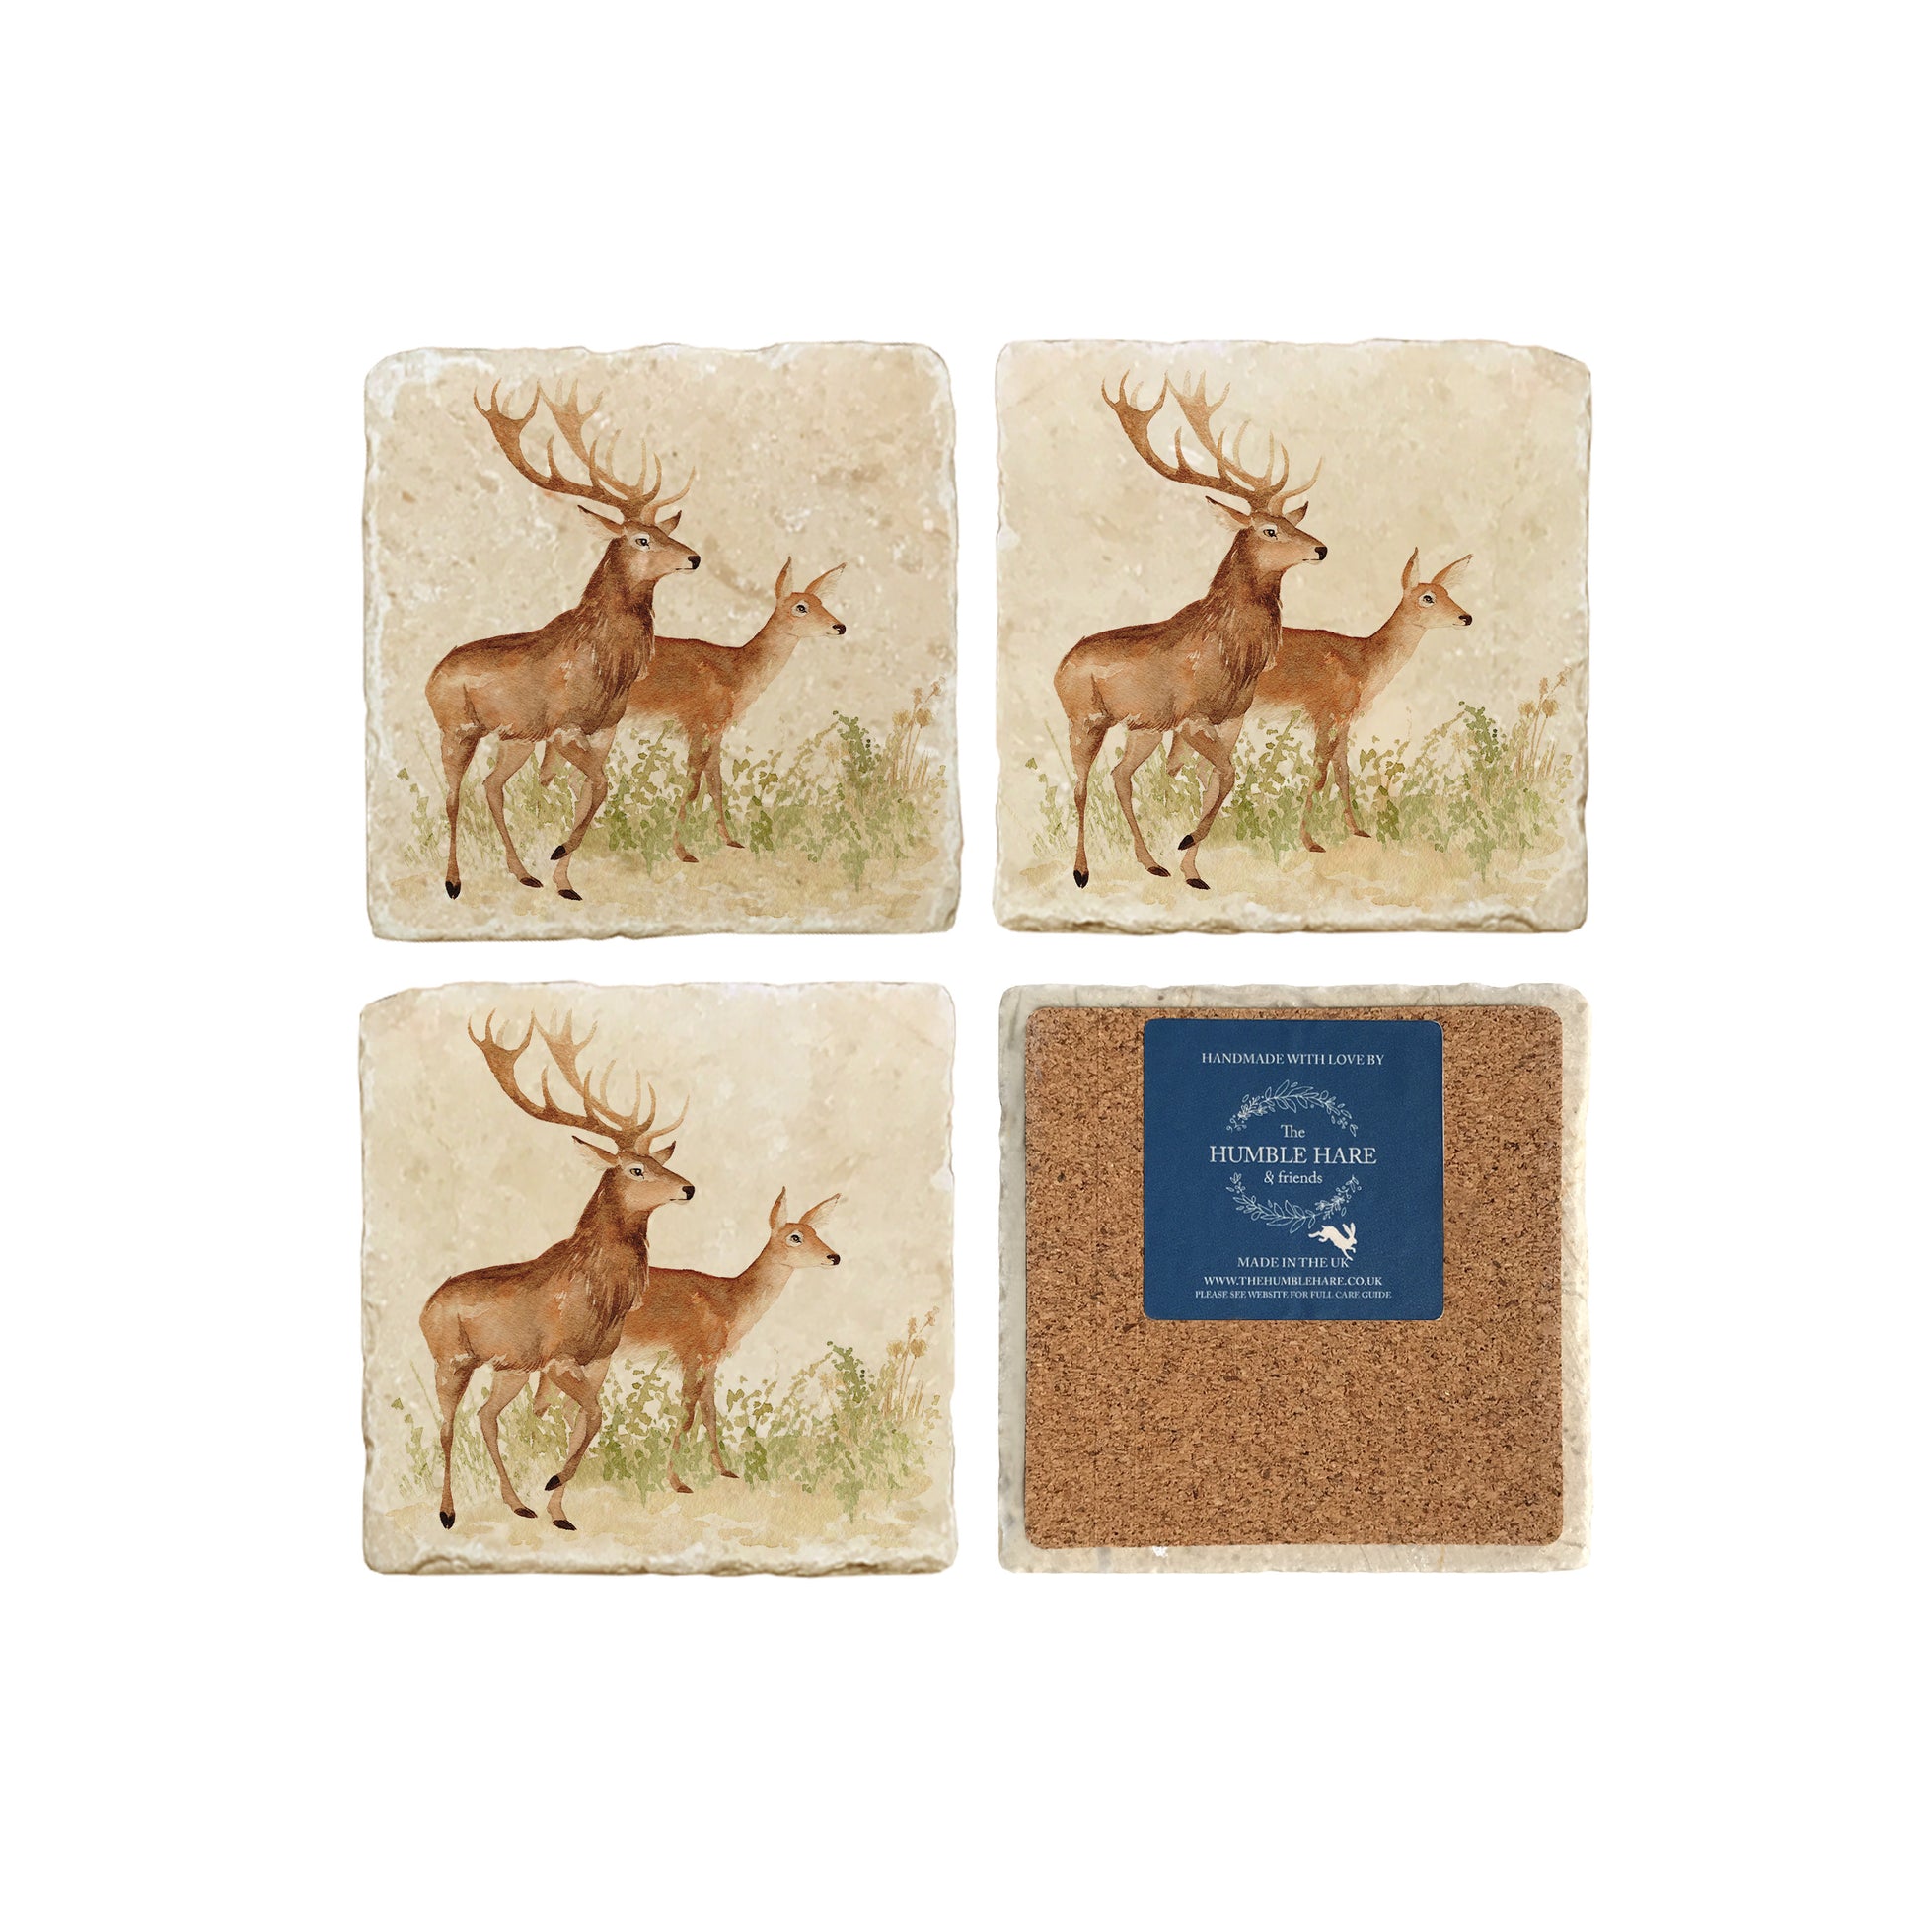 A set of four square marble coasters, featuring a watercolour design of a red deer stag and hind. One coaster is flipped to show that the coasters are backed with cork.